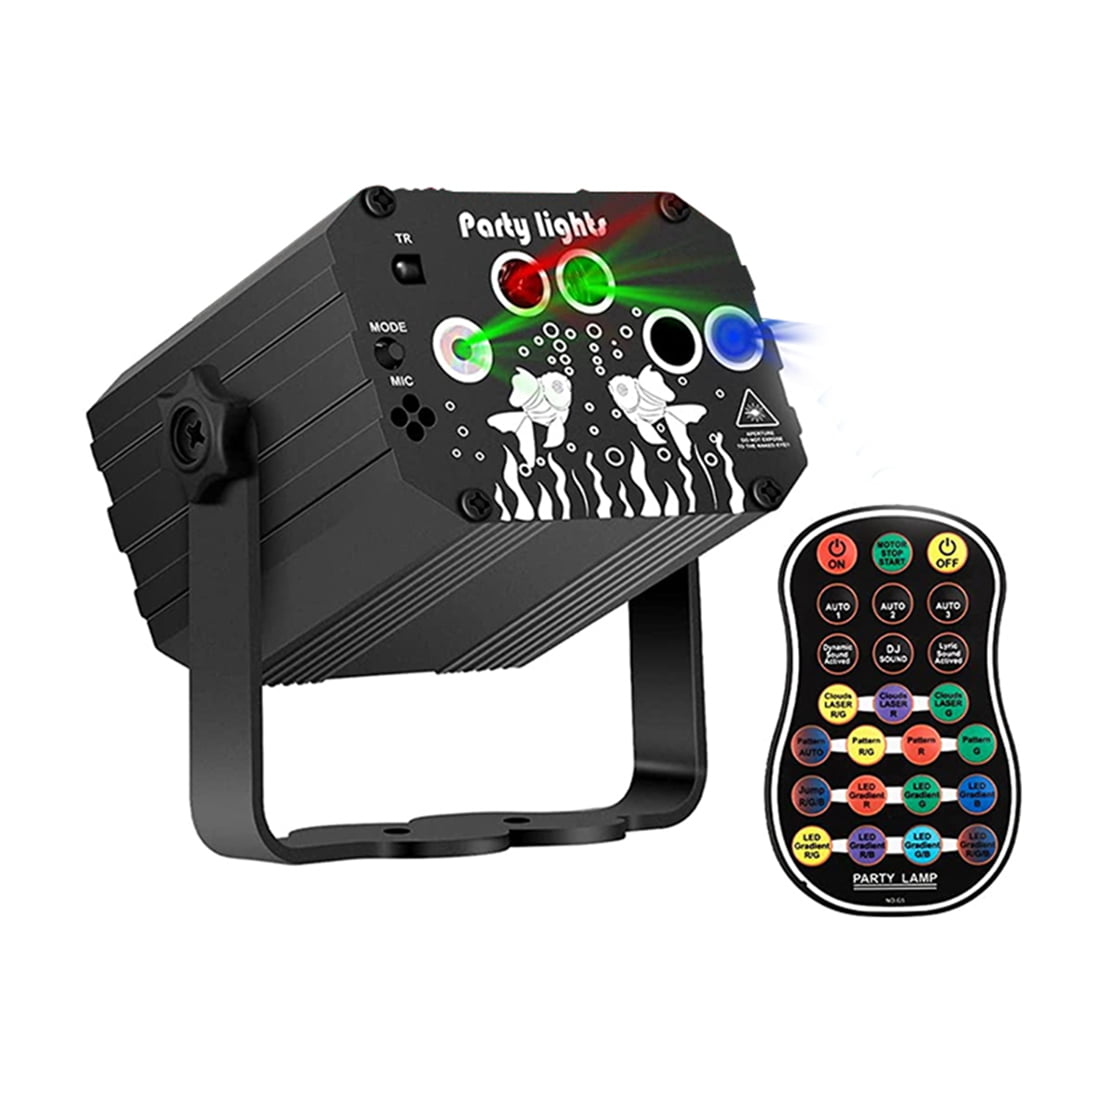 DJ Party Light - Northern Light Effect RGB Sound Activated Strobe Lighting with Remote Control,Plugged in - Walmart.com